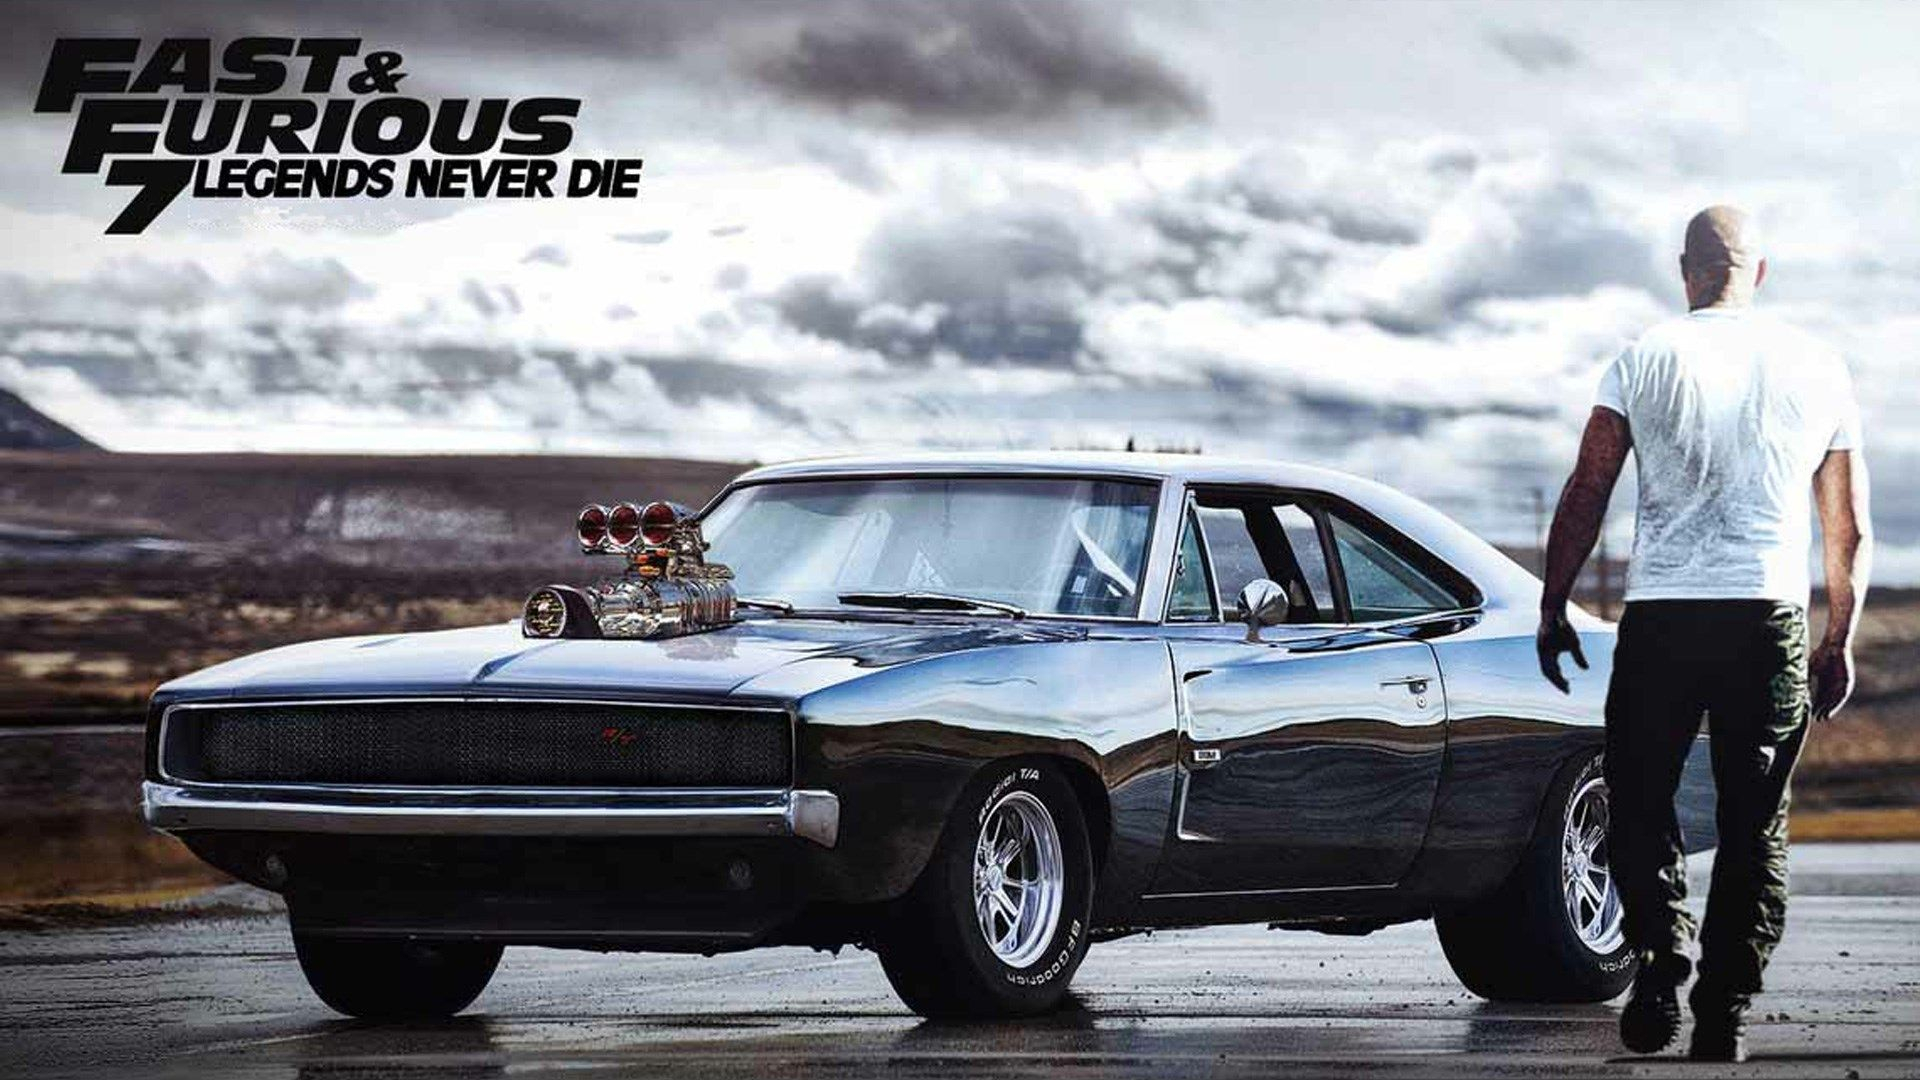 1920x1080 Fast and Furious 8 Car Wallpapers Top Free Fast and Furious 8 Car Backgrounds